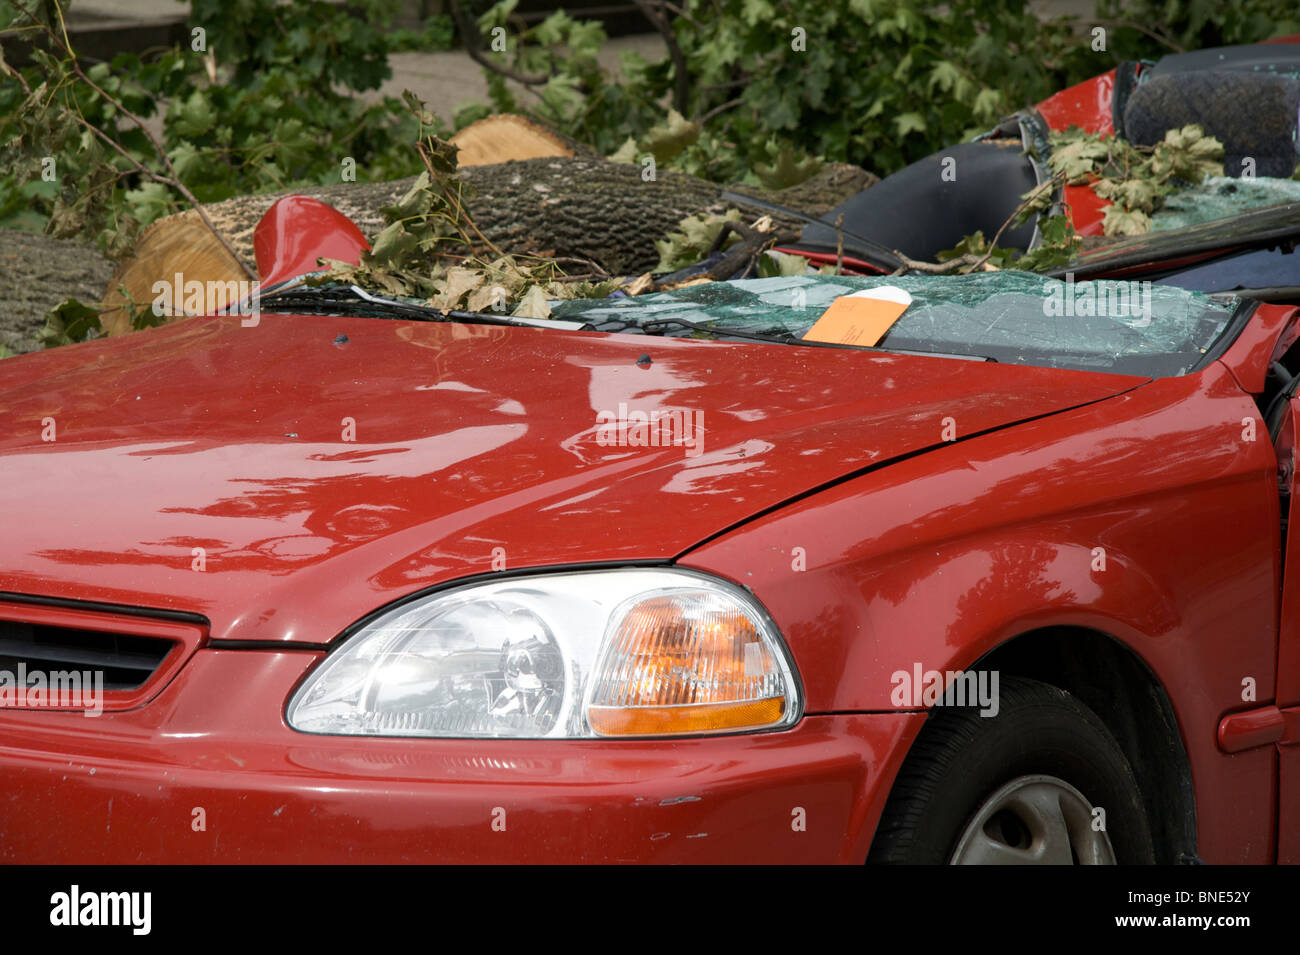 Honda Civic crushed by fallen tree after windstorm. Stock Photo